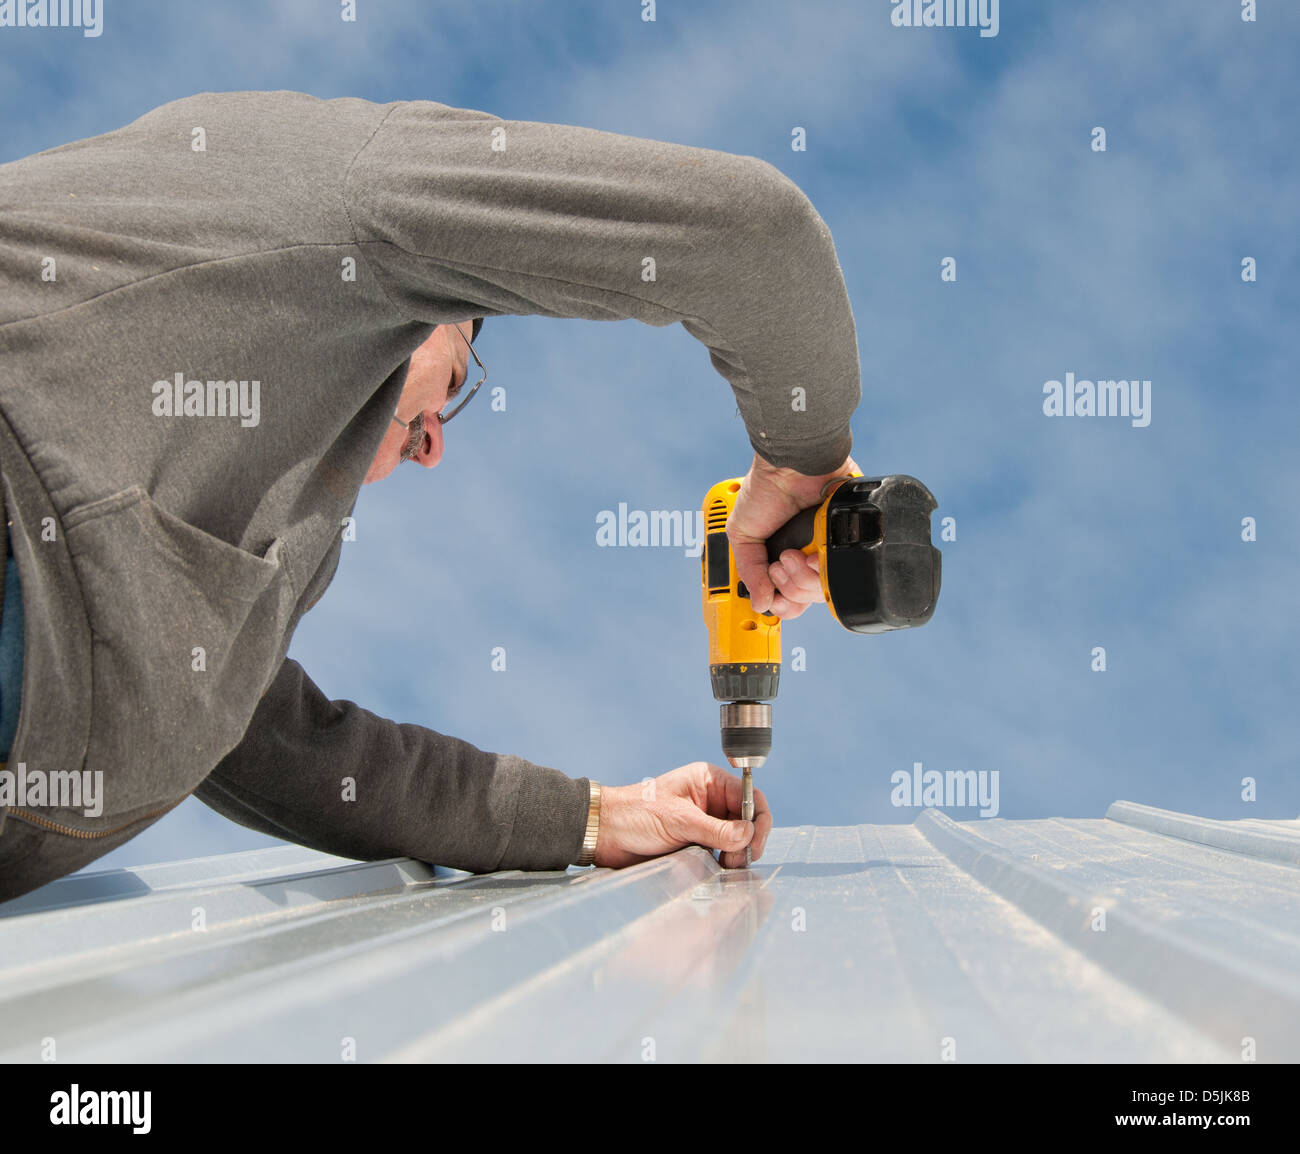 Man fastening down a metal roof with screws; with cloudy sky background Stock Photo